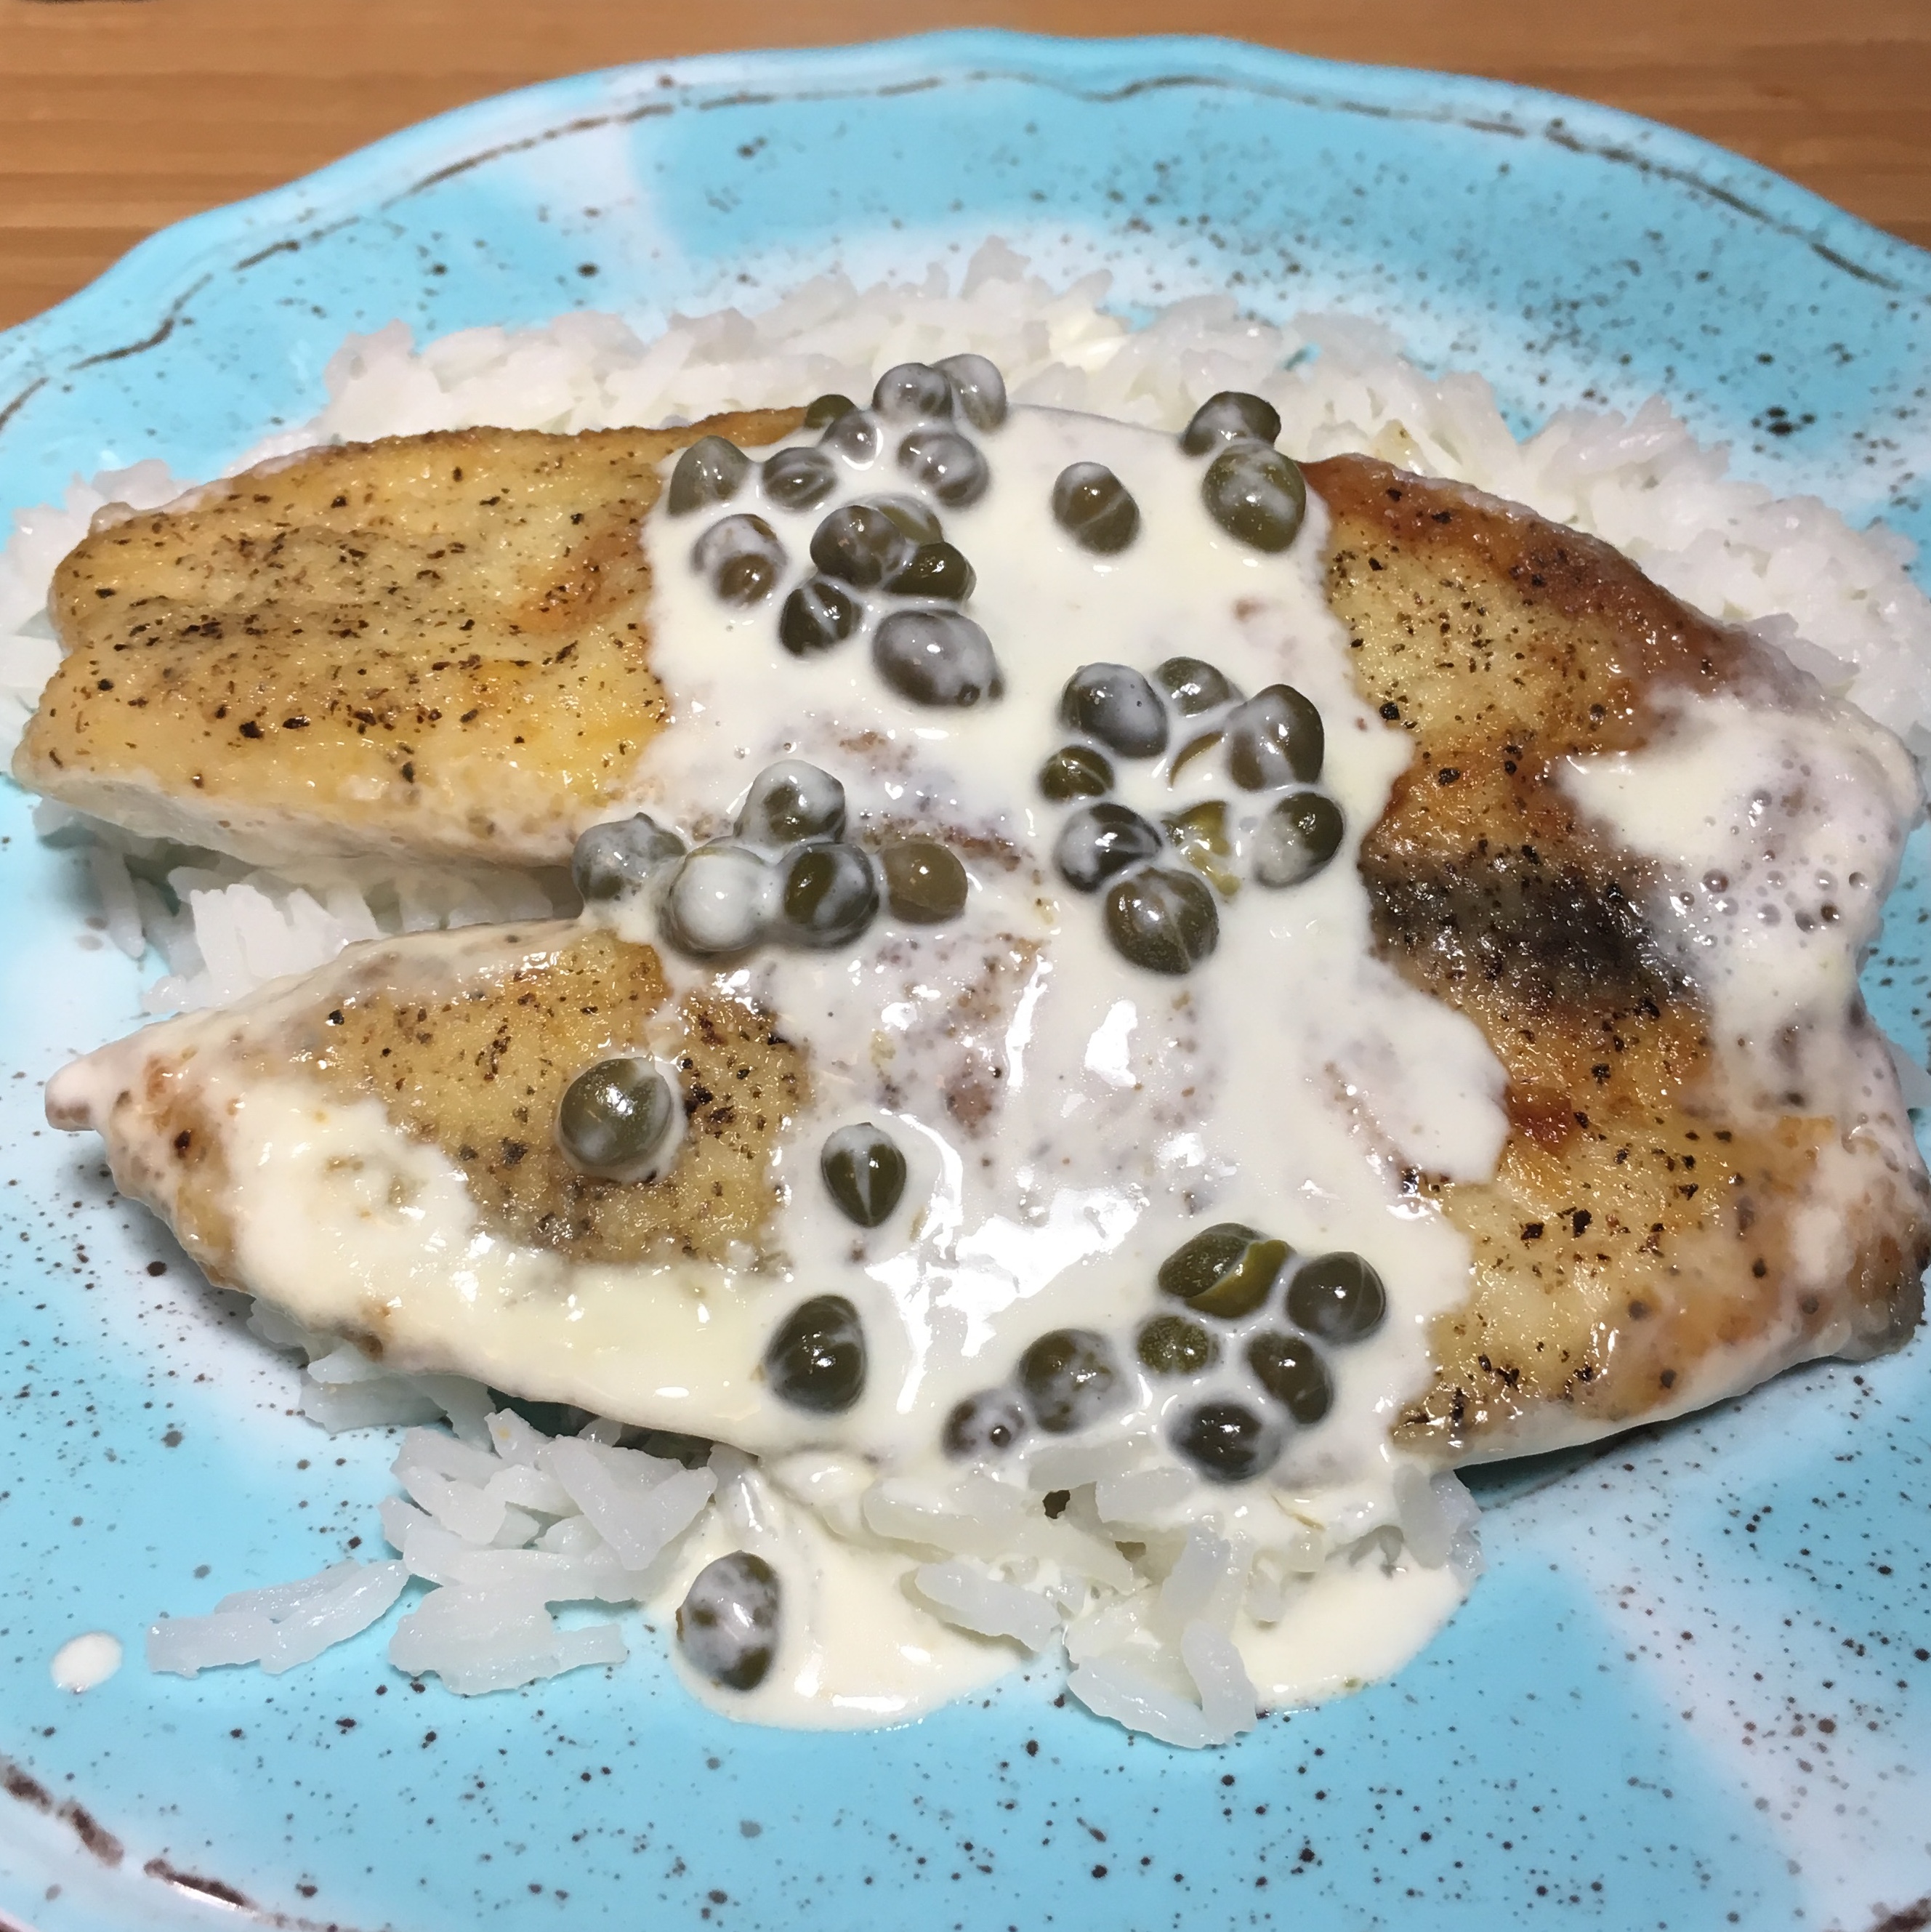 Pan-Fried Tilapia Fillets with Capers